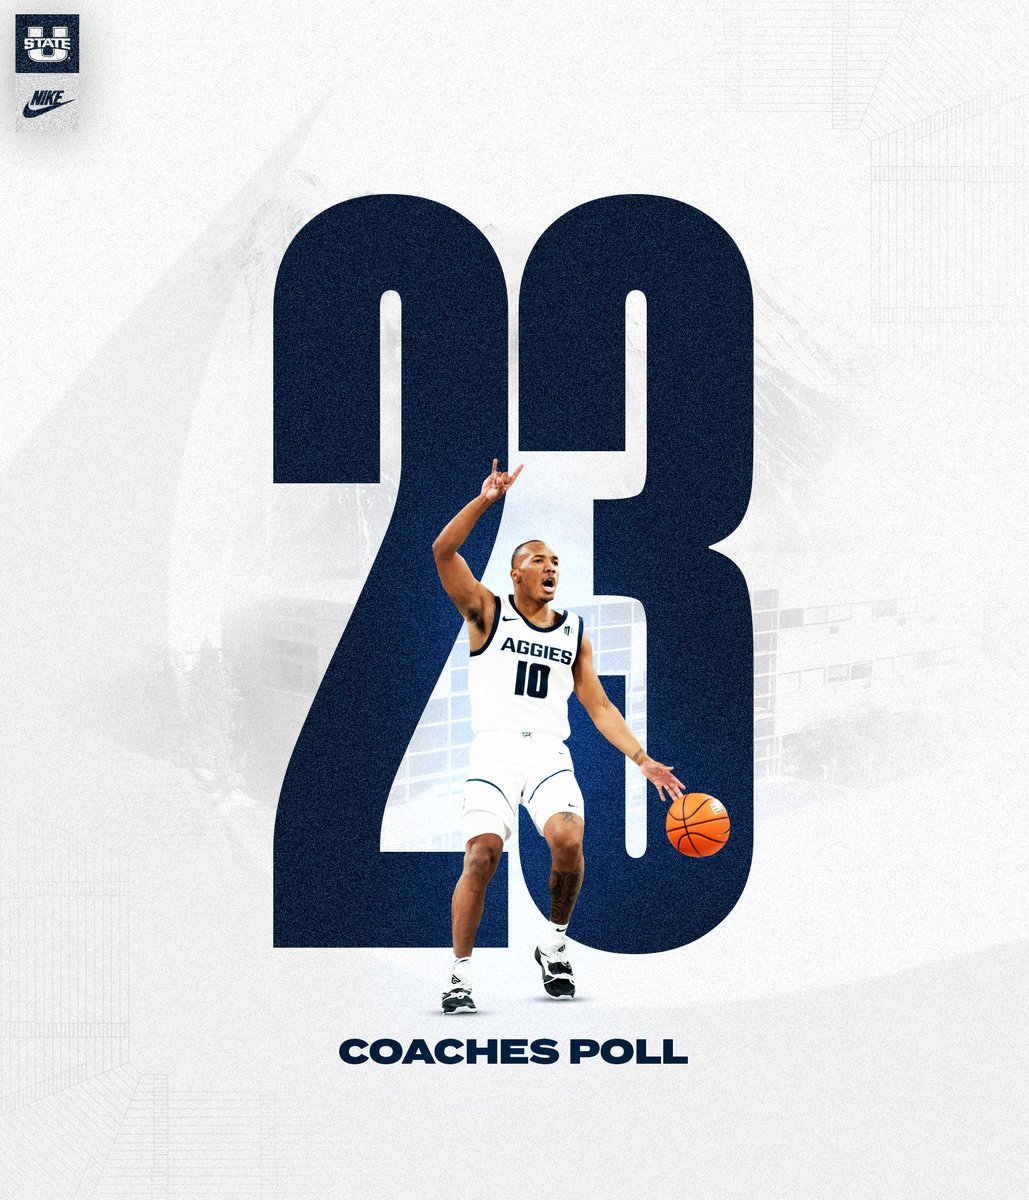 Coming in at No. 23 in the Coaches Poll 👏 🔗 tinyurl.com/mrxwtuwt #AggiesAllTheWay